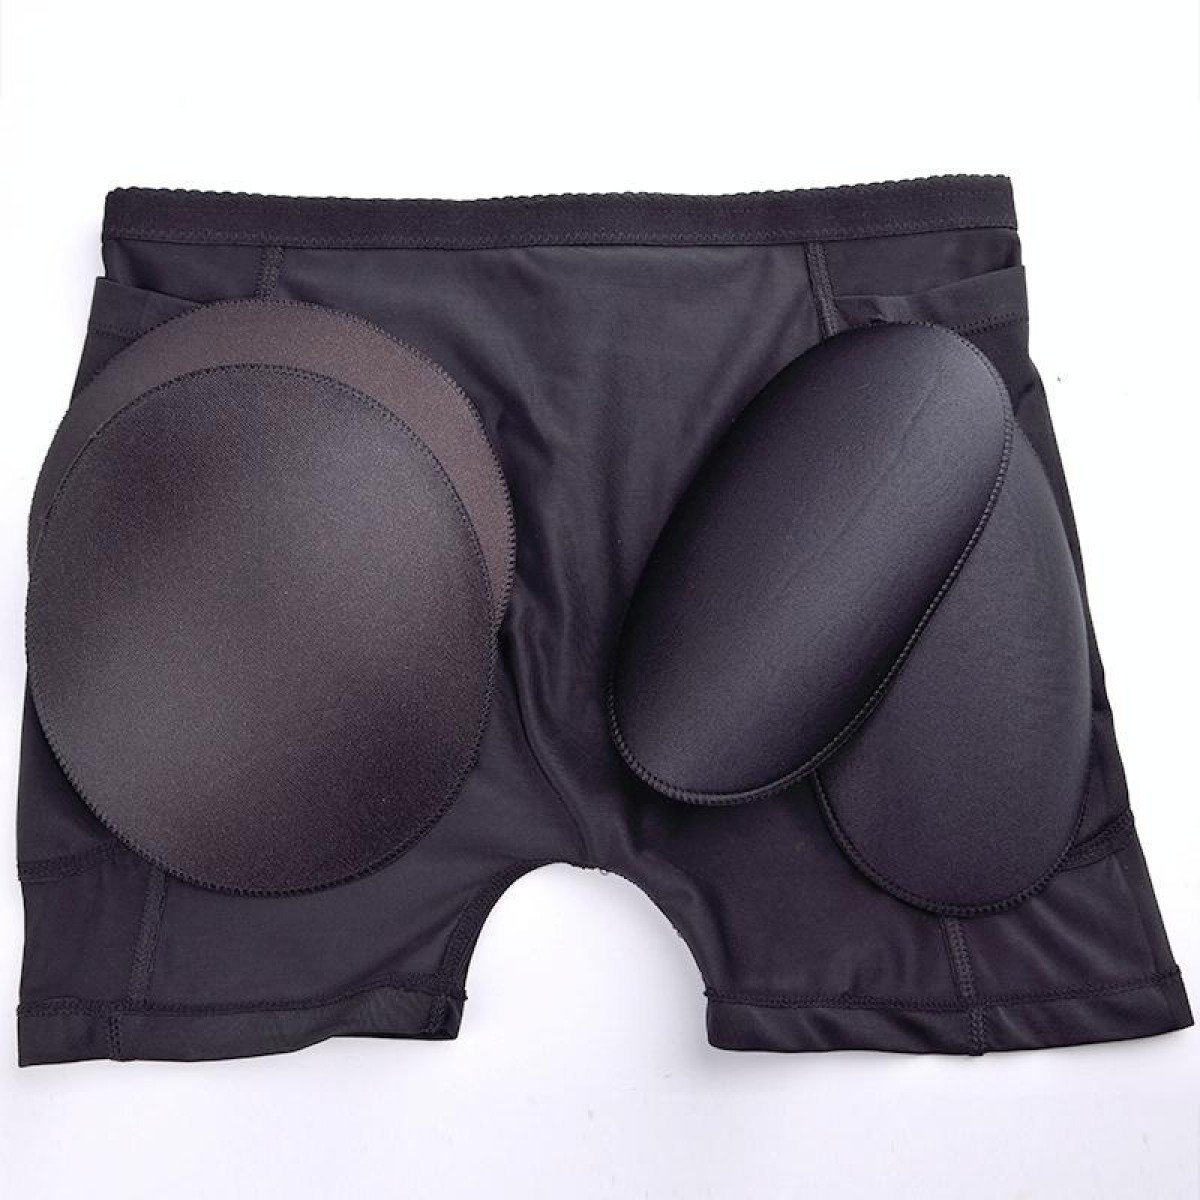 Full Buttocks and Hips Sponge Cushion Insert to Increase Hips and Hips Lifting Panties, Size: L(Complexion)